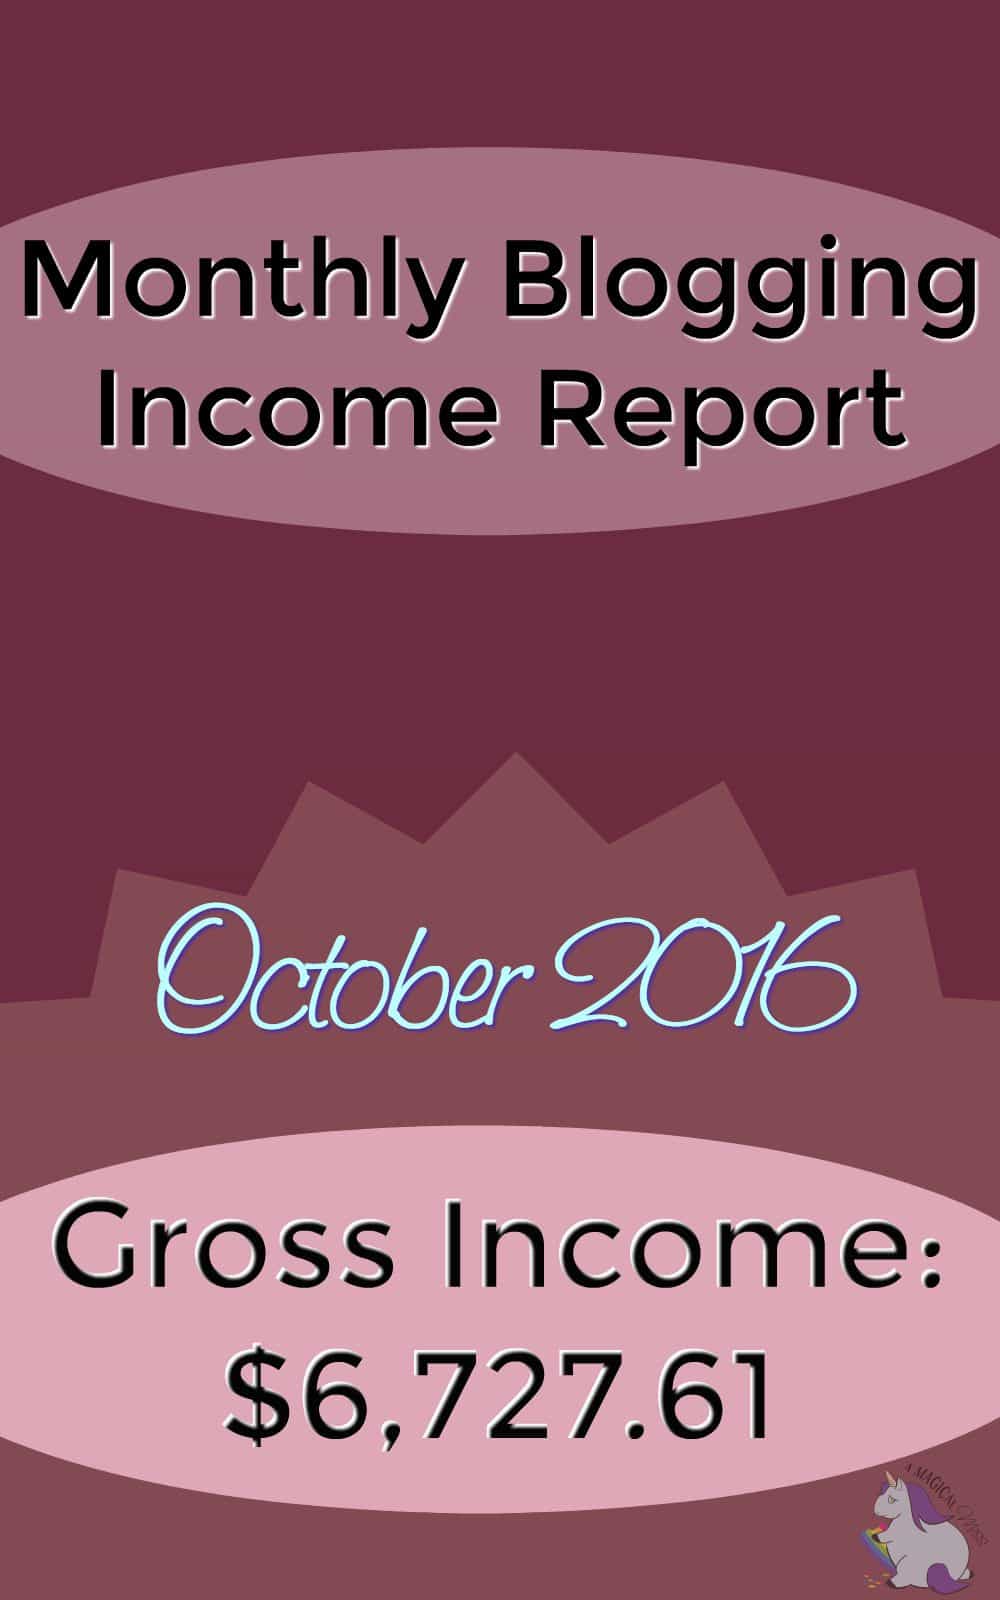 Monthly Blog Income Report - October 2016